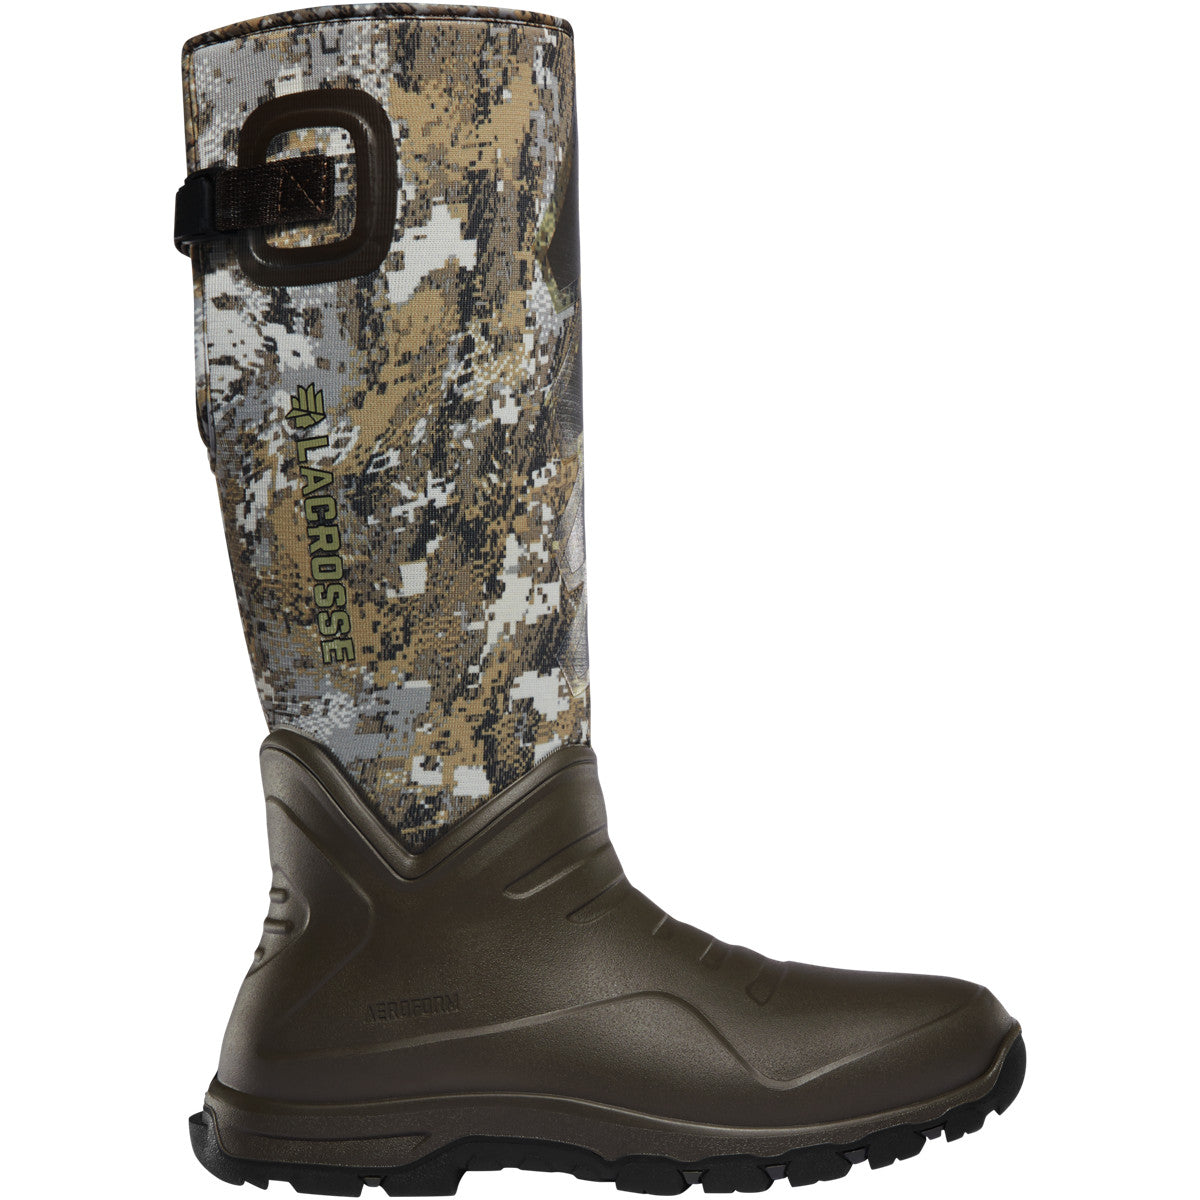 Lacrosse Aerohead Sport 16" Boot-HUNTING/OUTDOORS-Optifade Elevated ii 7mm-9-Kevin's Fine Outdoor Gear & Apparel